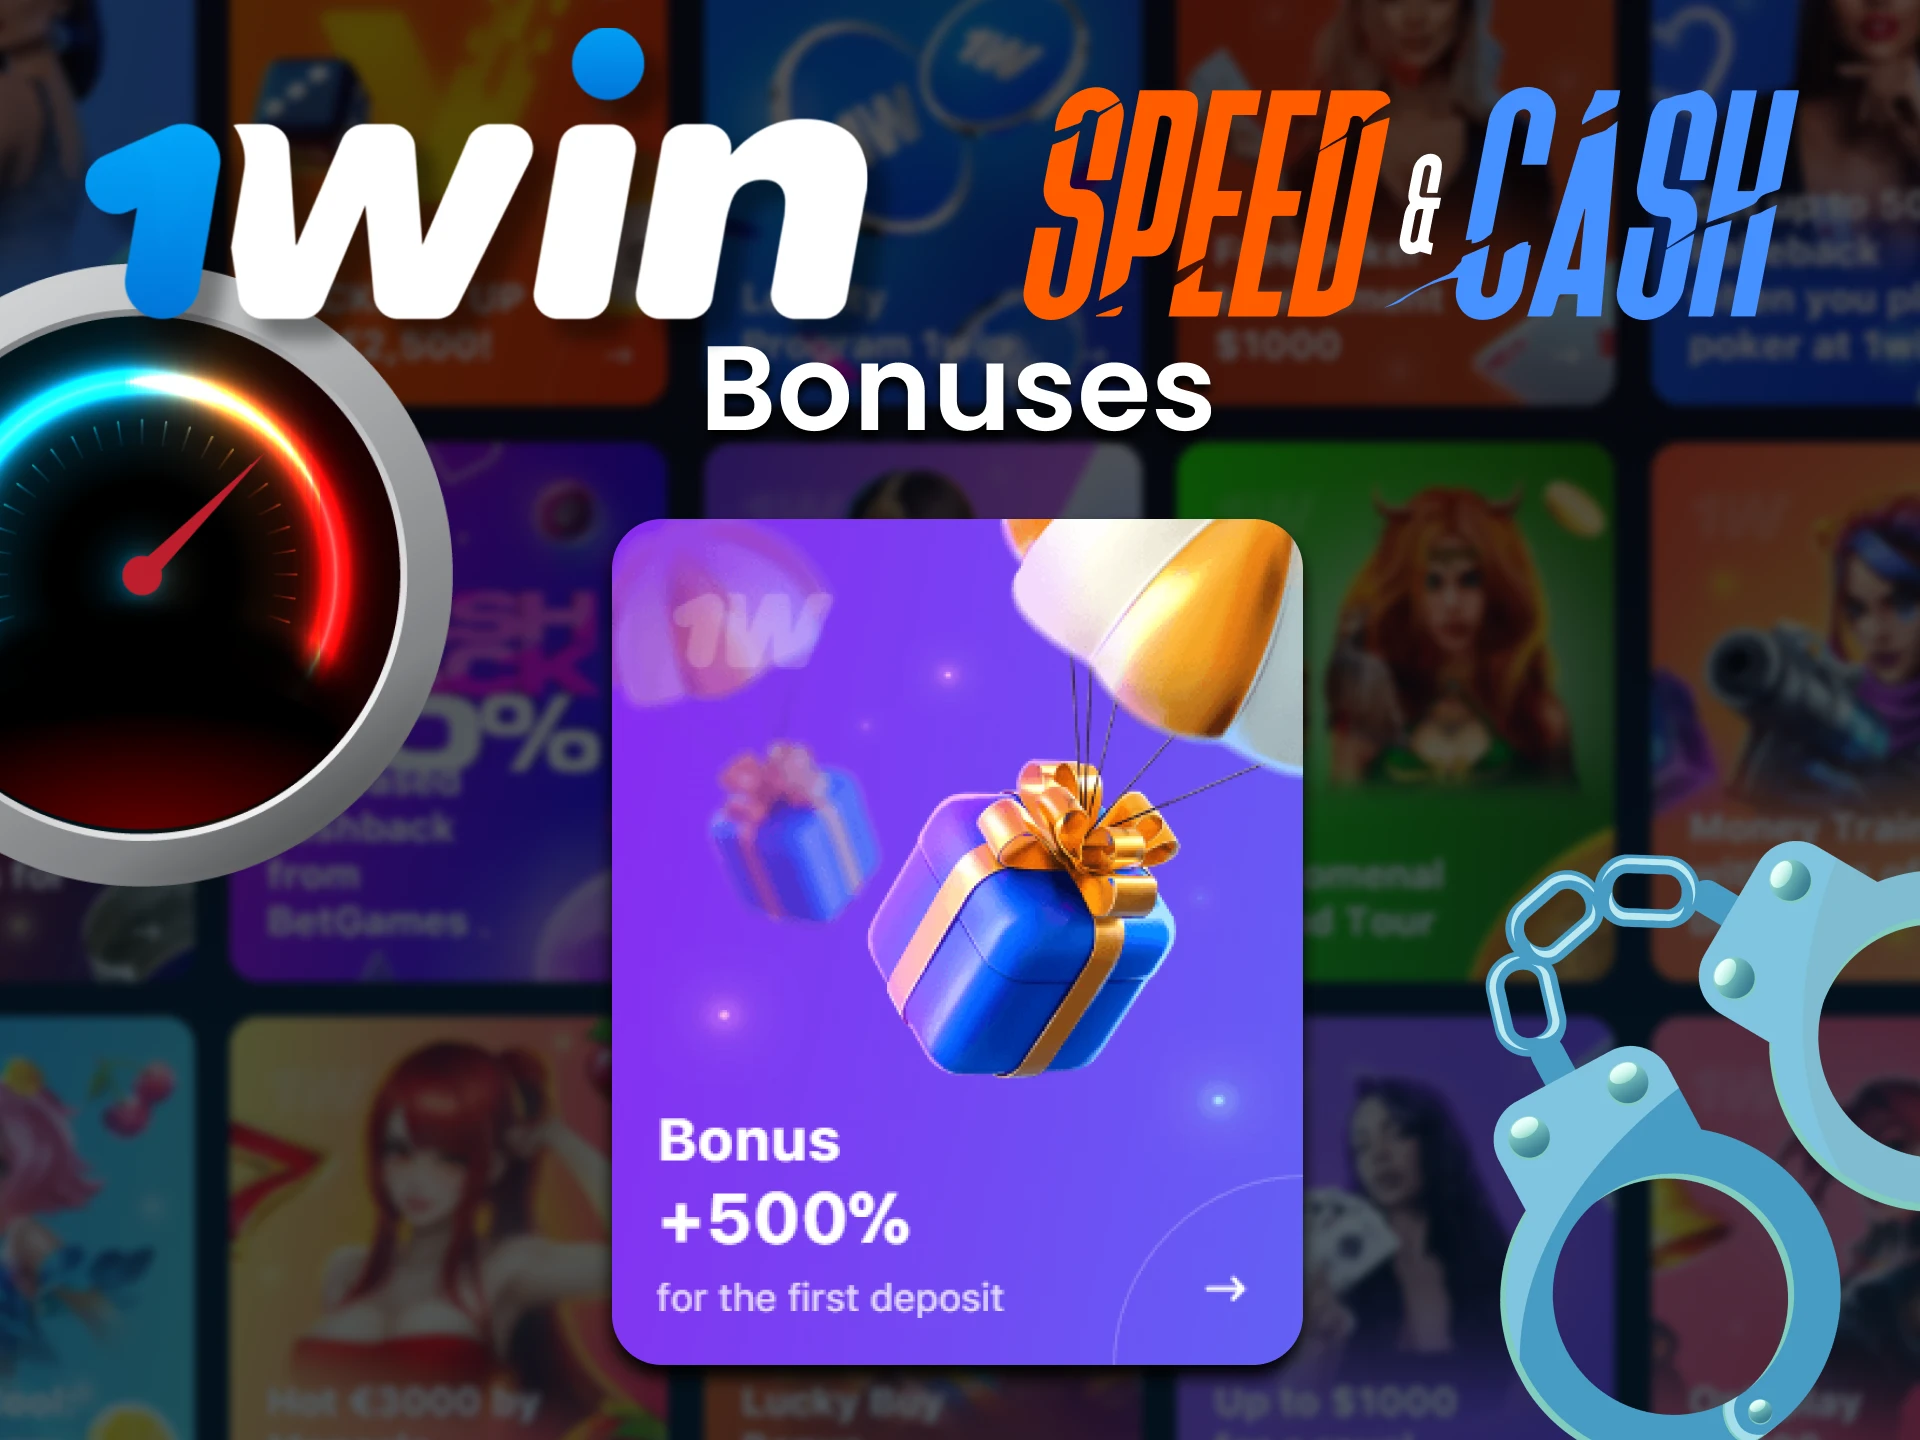 Get a +500% bonus for Speed & Cash at 1Win for the first four deposits.